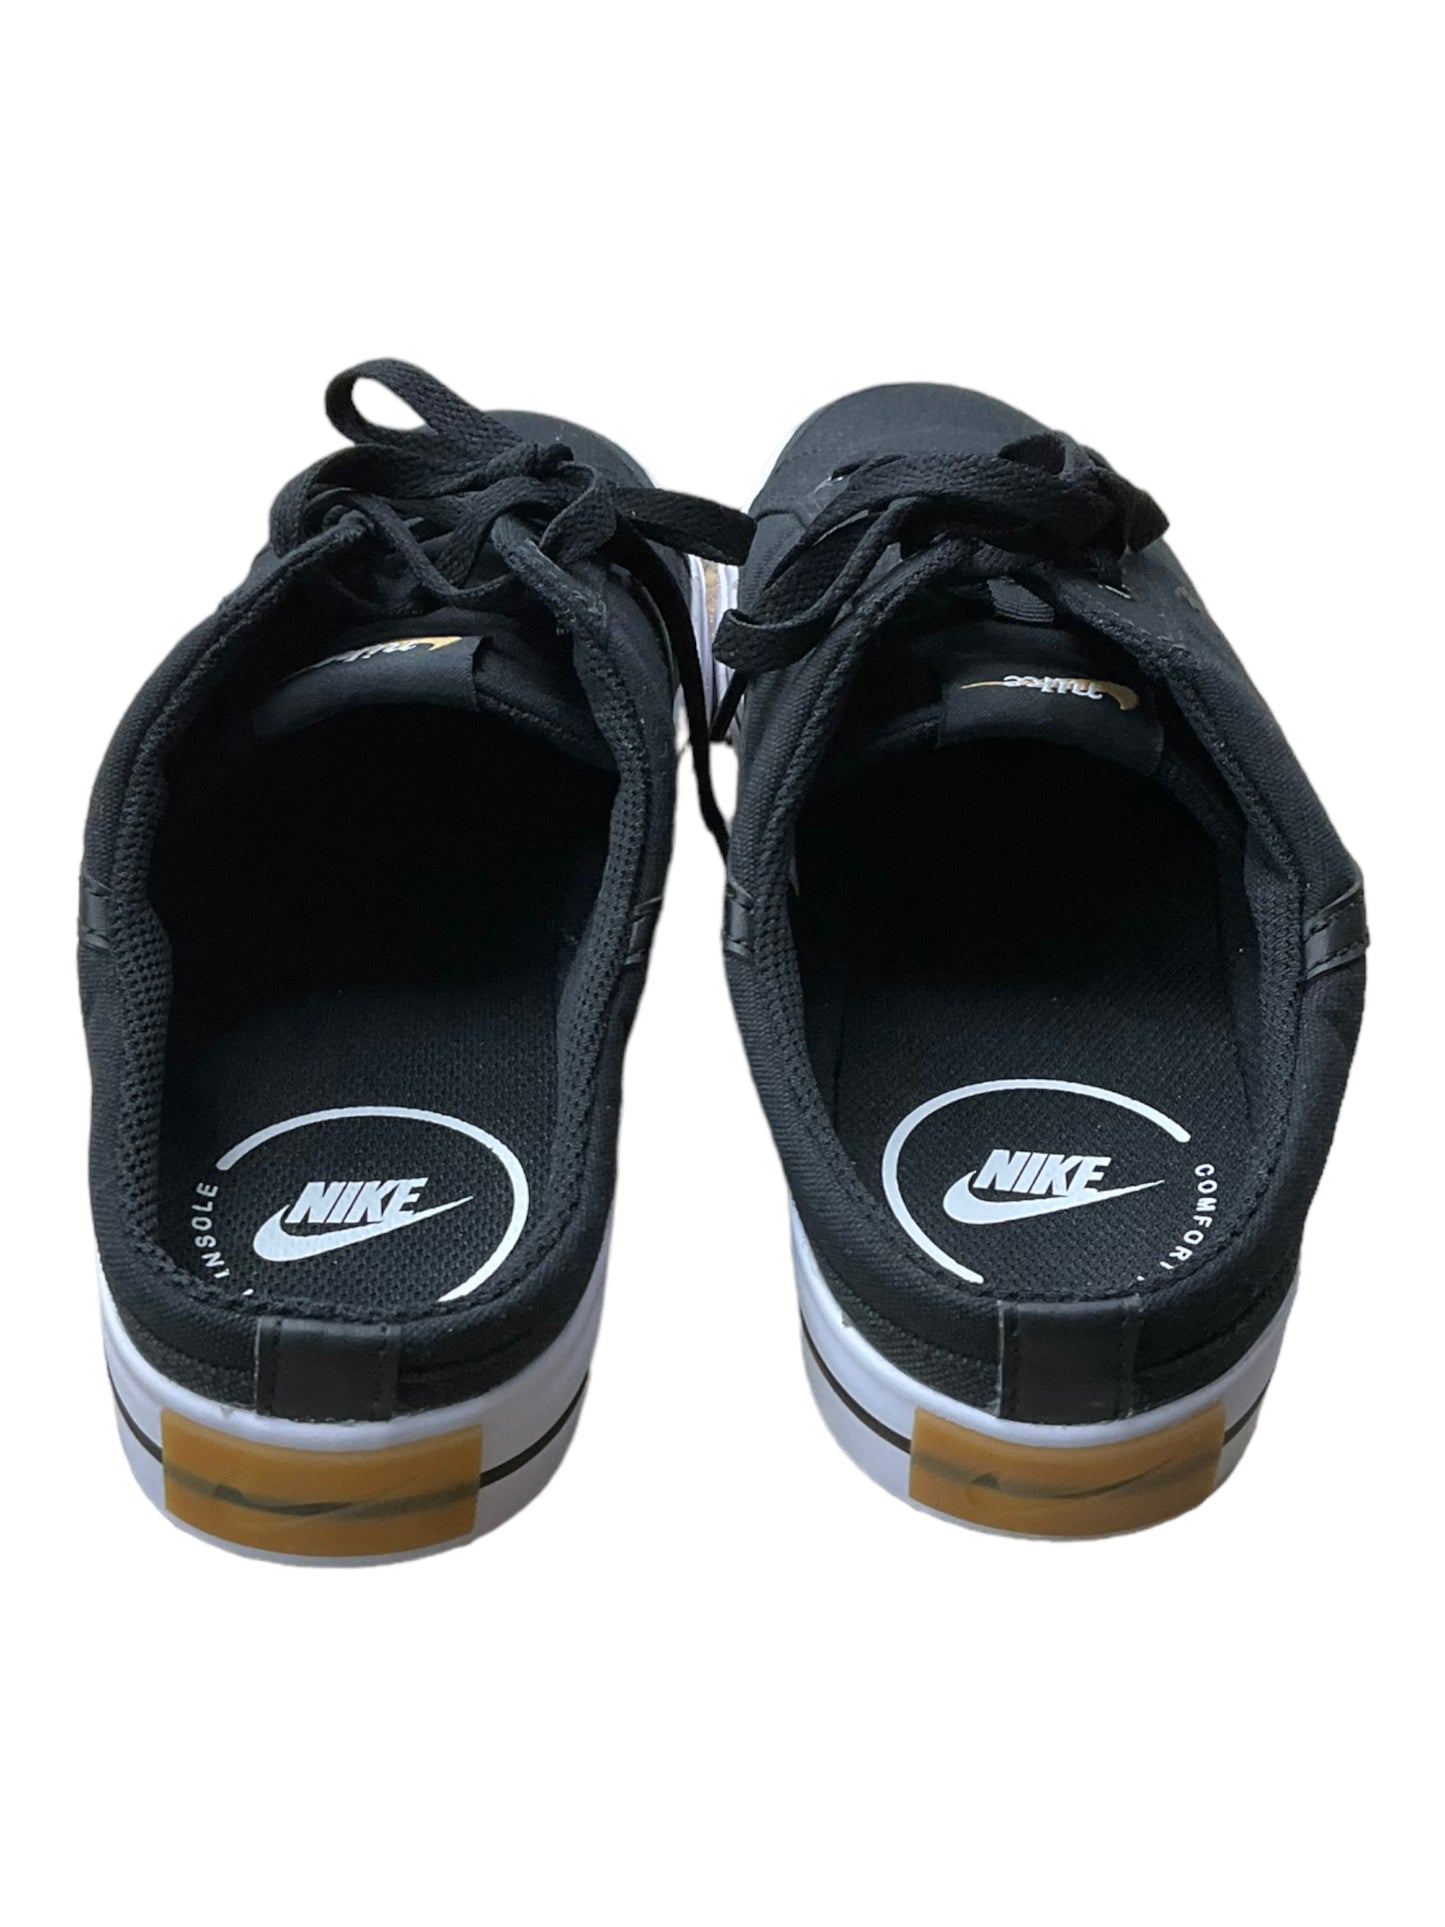 Shoes Sneakers By Nike  Size: 11